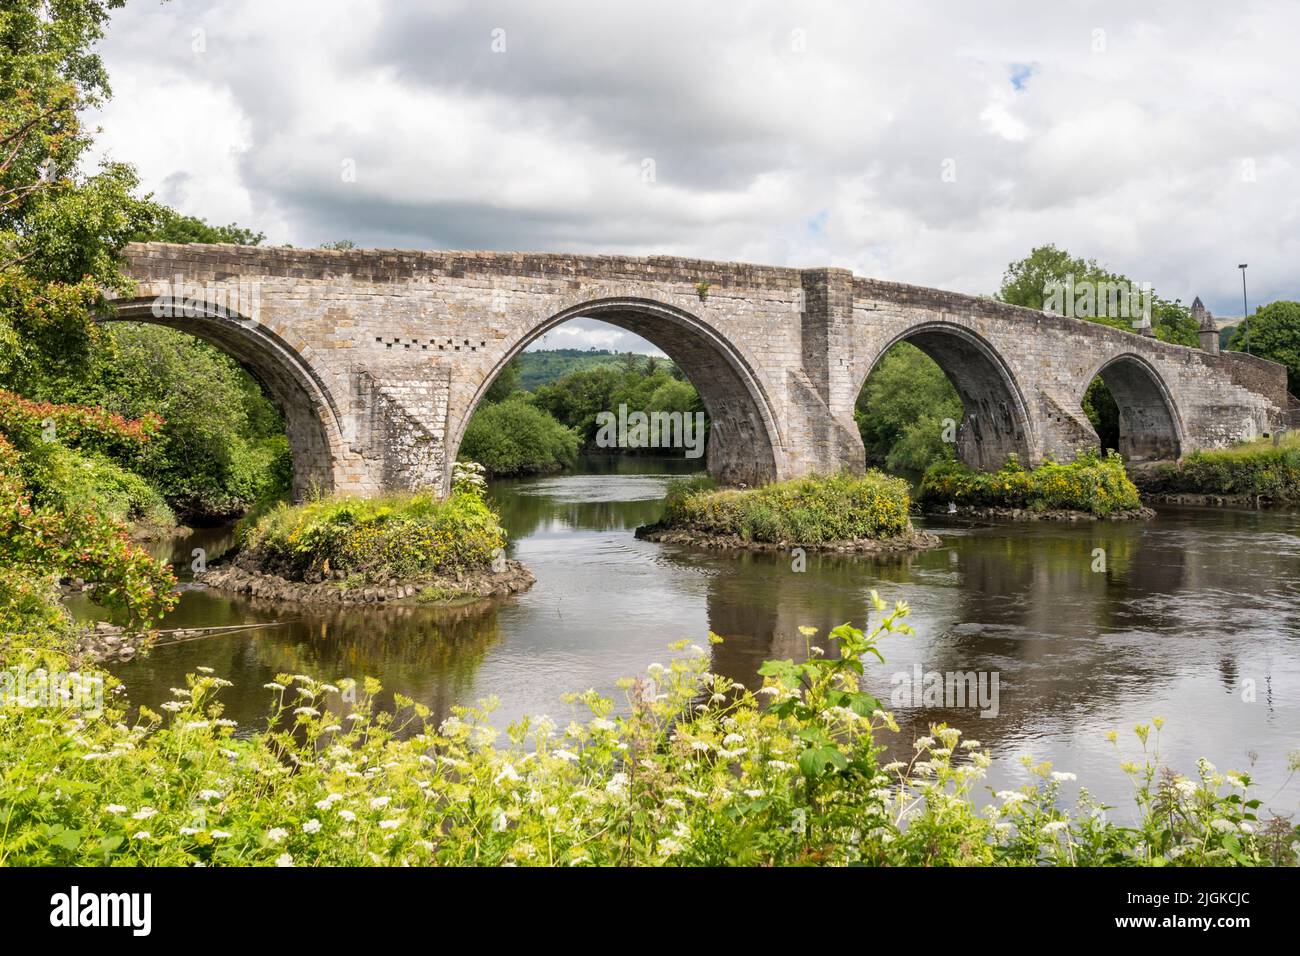 Stirling Old Bridge dates from the late-15th or early-16th century and is one of the best mediaeval masonry arch bridges in Scotland. Stock Photo